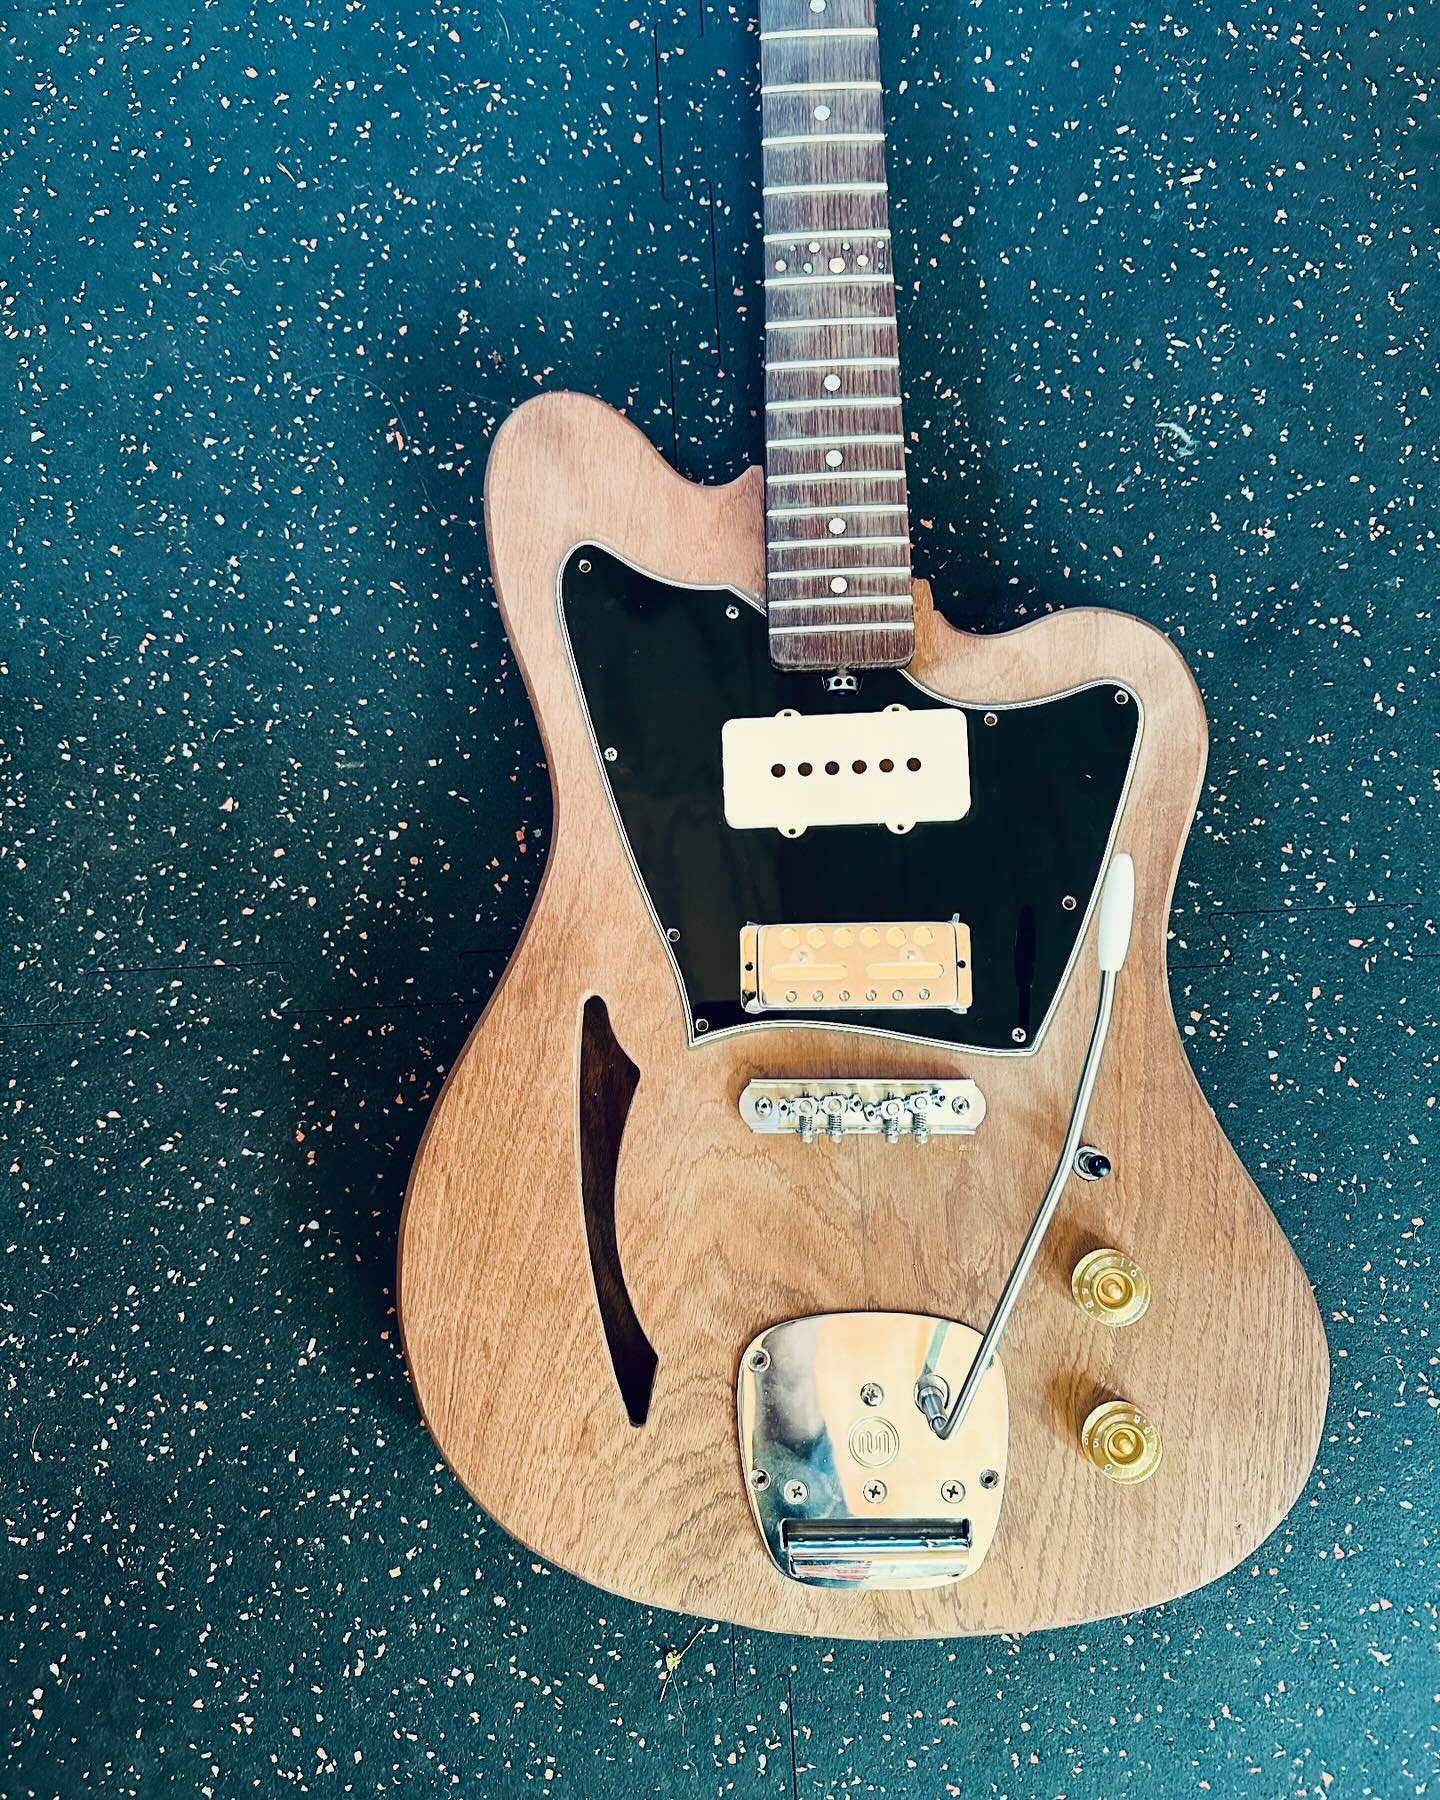 Last in the newest batch of electrics is a highly chambered Honduran mahogany body, with a @masterybridge and vibrato, @lollarpickups Jazzmaster neck and surface mount goldfoil bridge, with a 25&rdquo; scale rosewood neck.  25&rdquo; scale is difficu